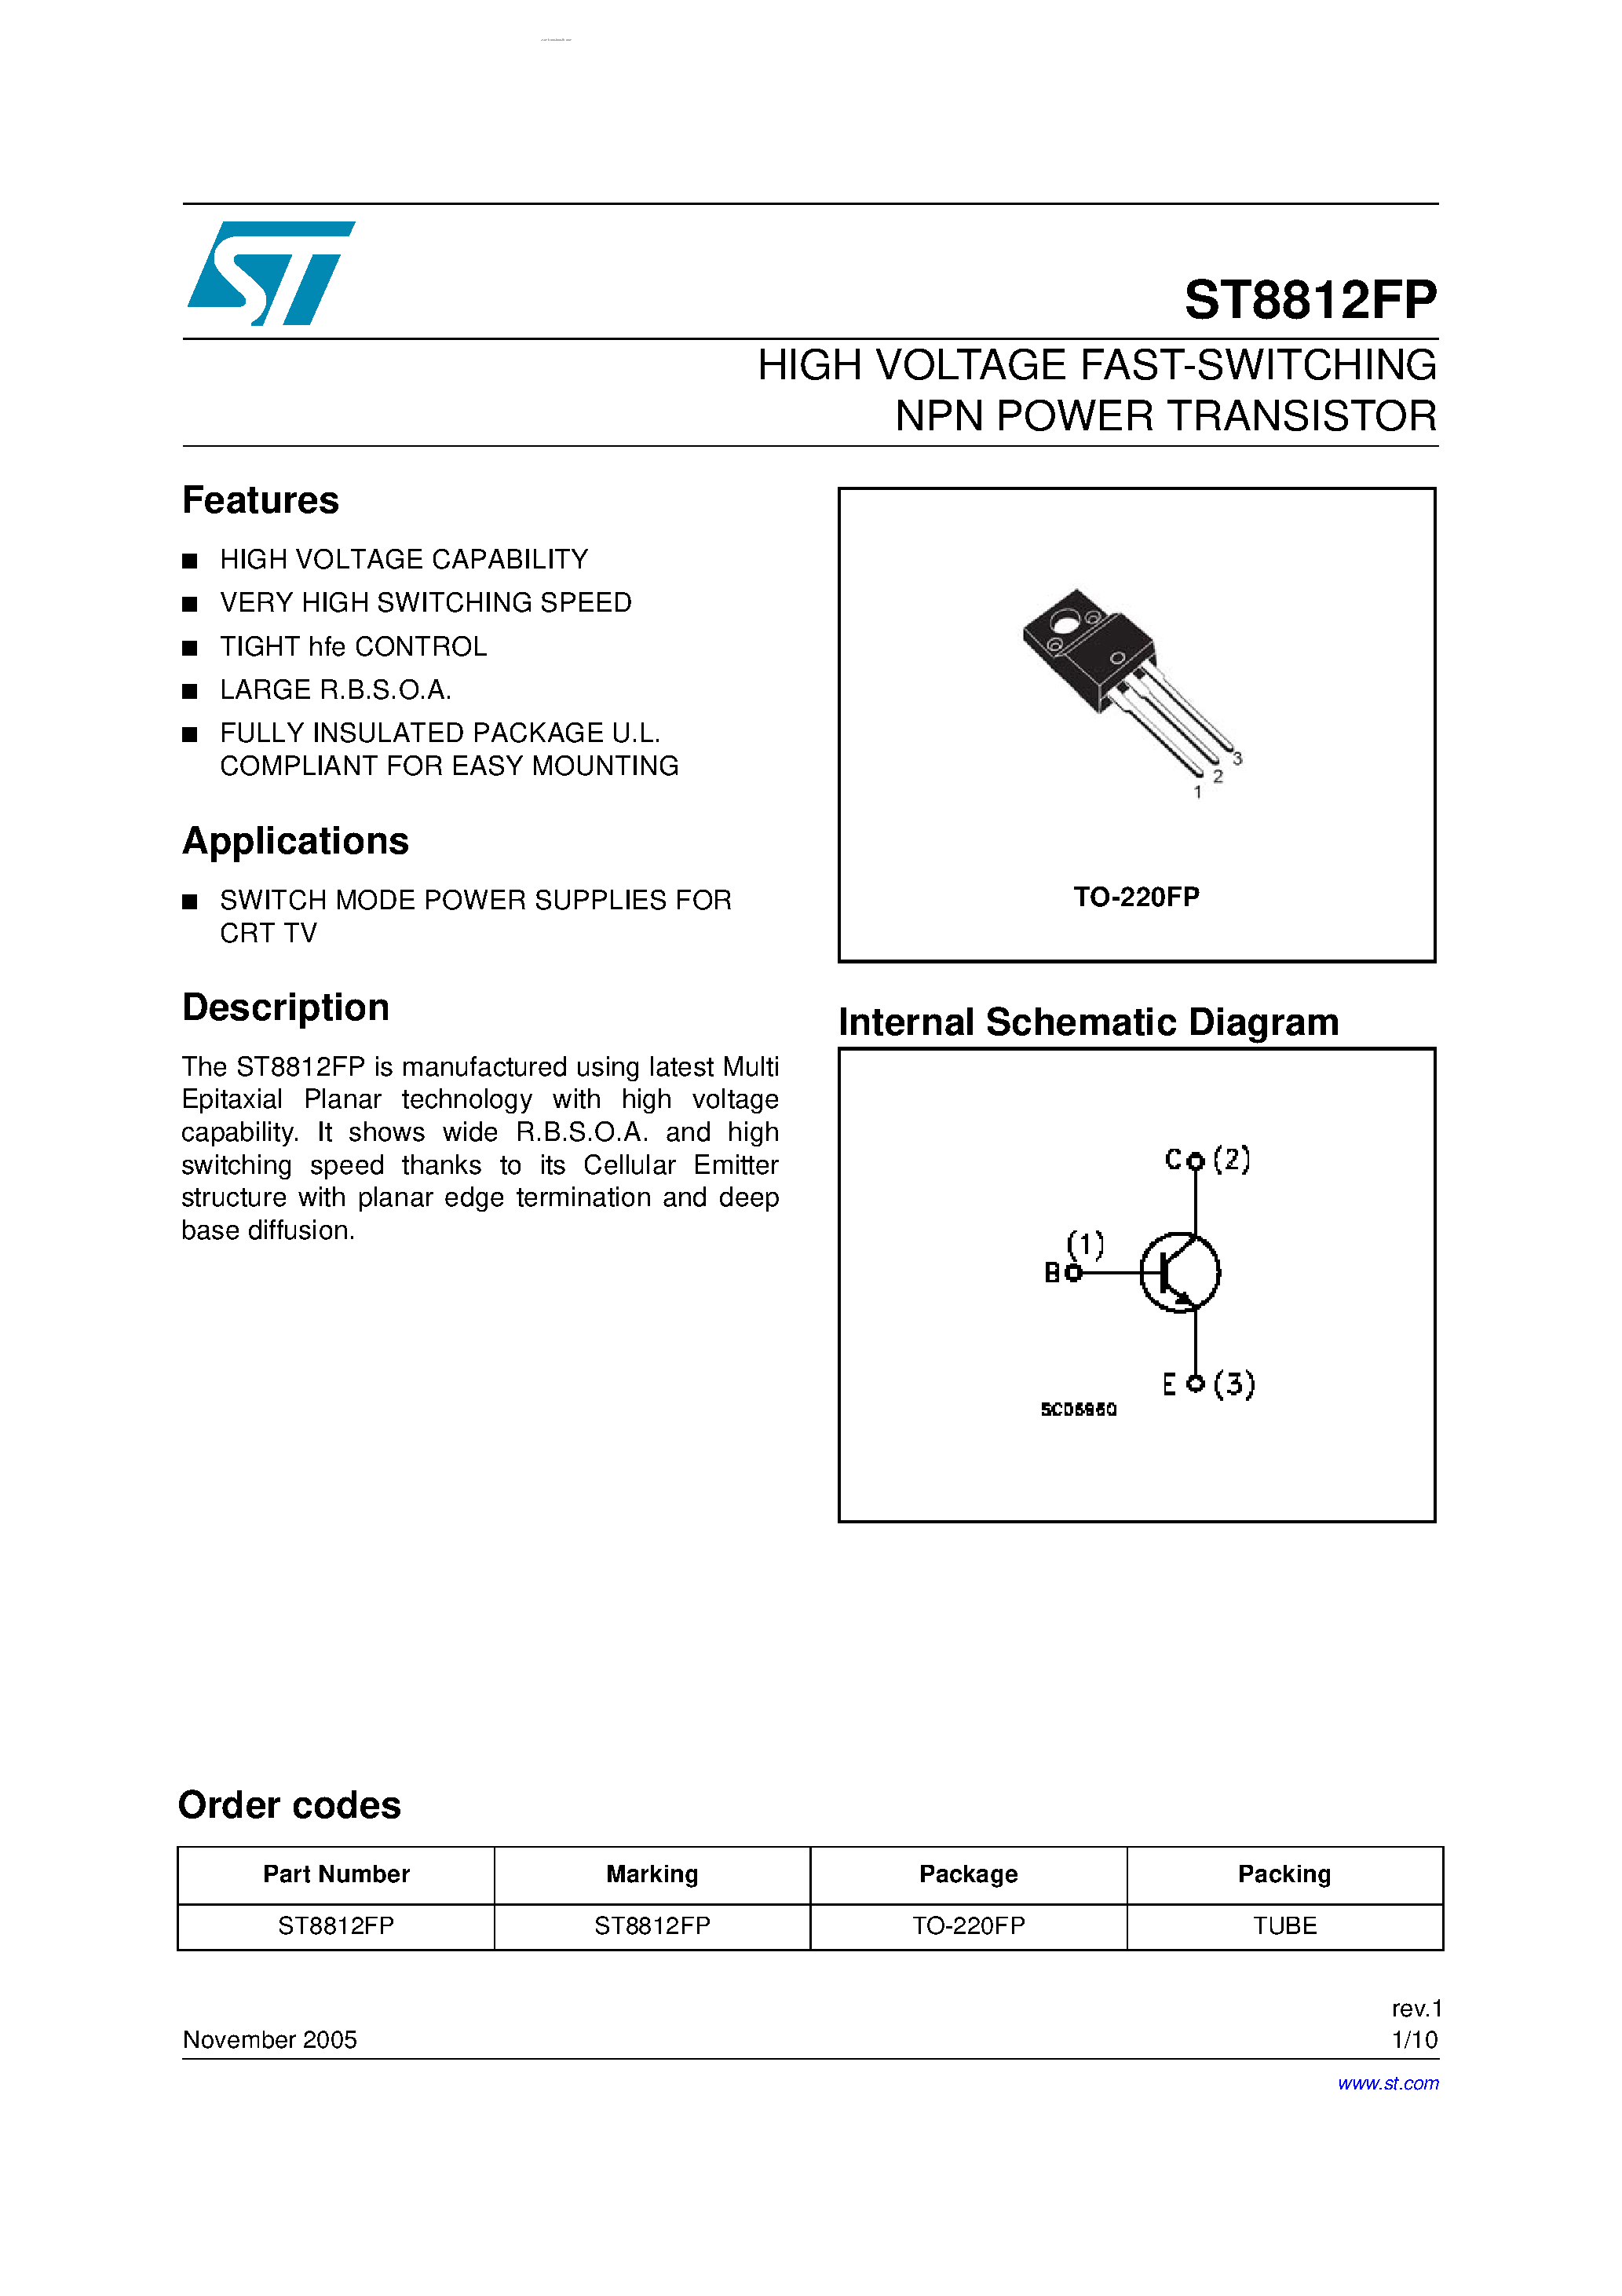 Даташит ST8812FP - High voltage fast-switching NPN Power transistor страница 1